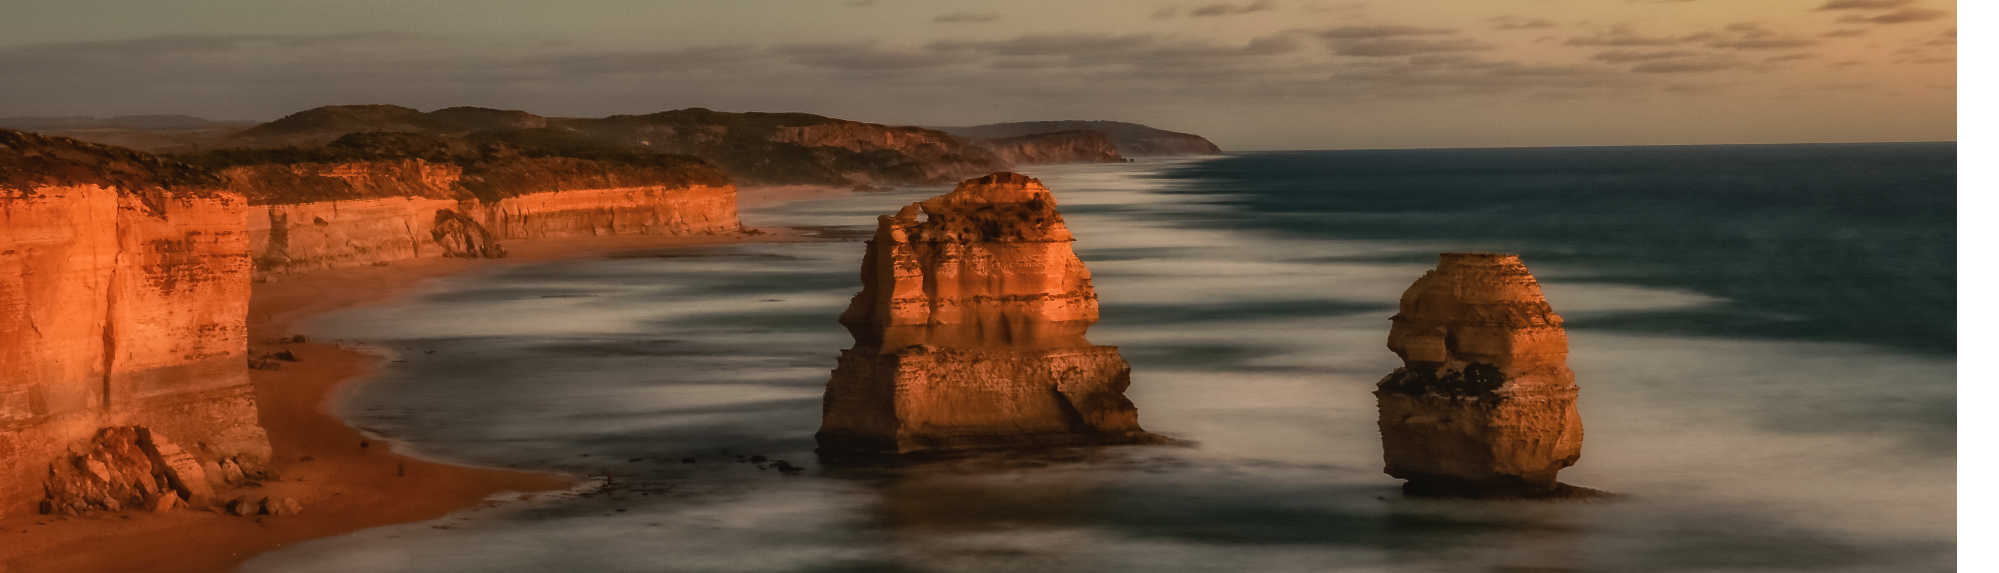 What to do on the Great Ocean Road during Wintertime